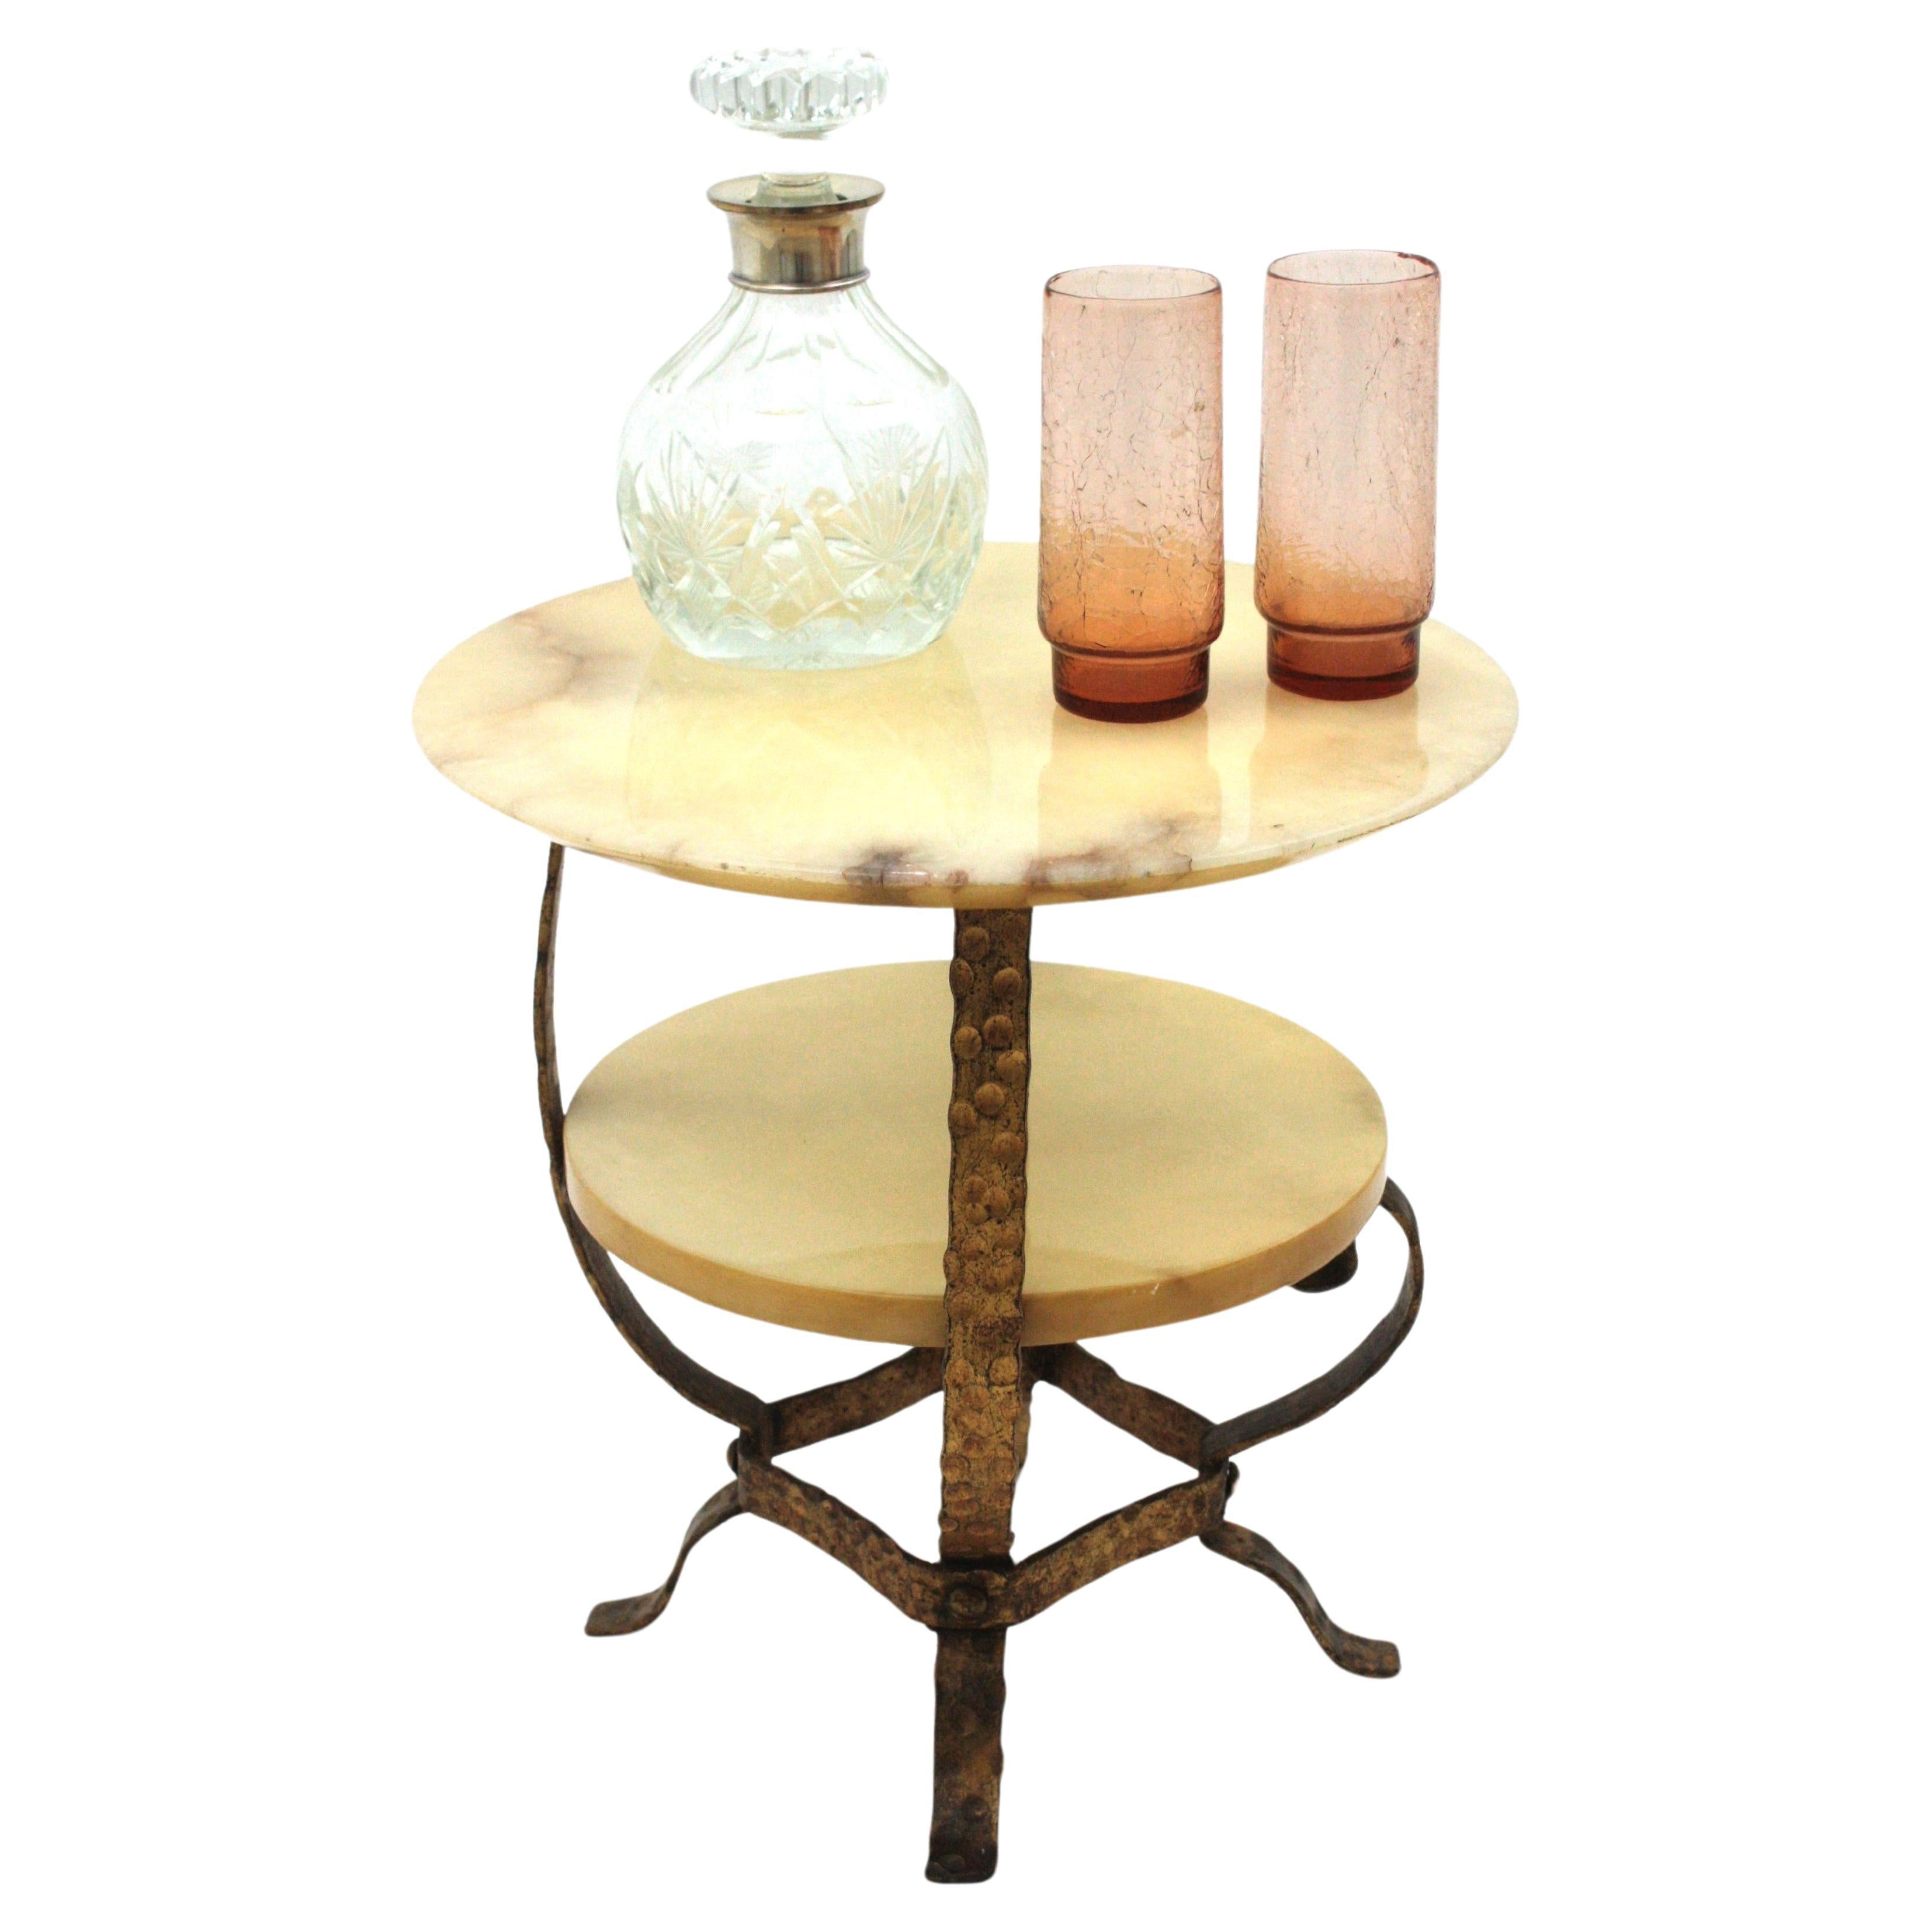 Spanish Coffee Table or Side Table, Alabaster & Gilt Iron